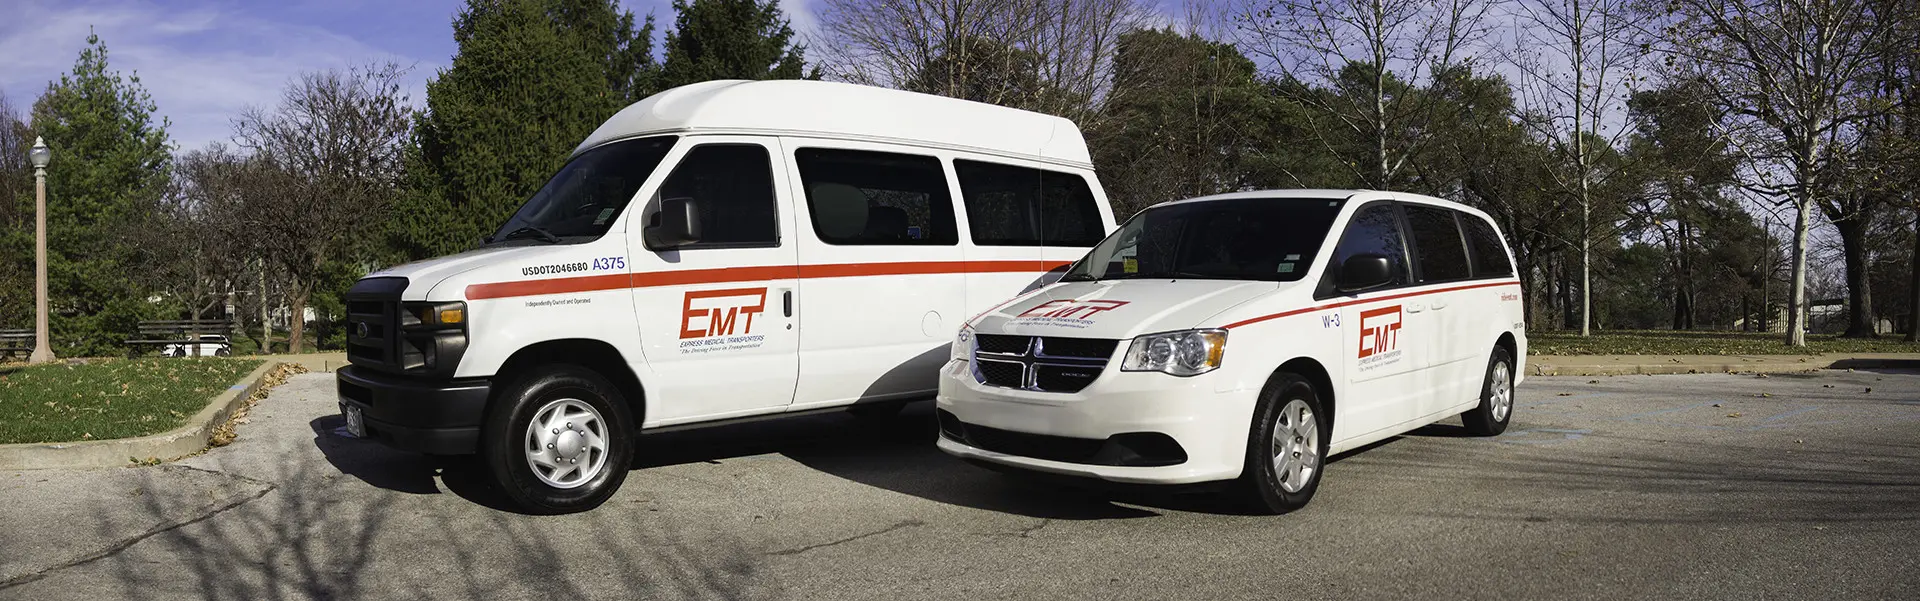 Two White EMT Vehicles